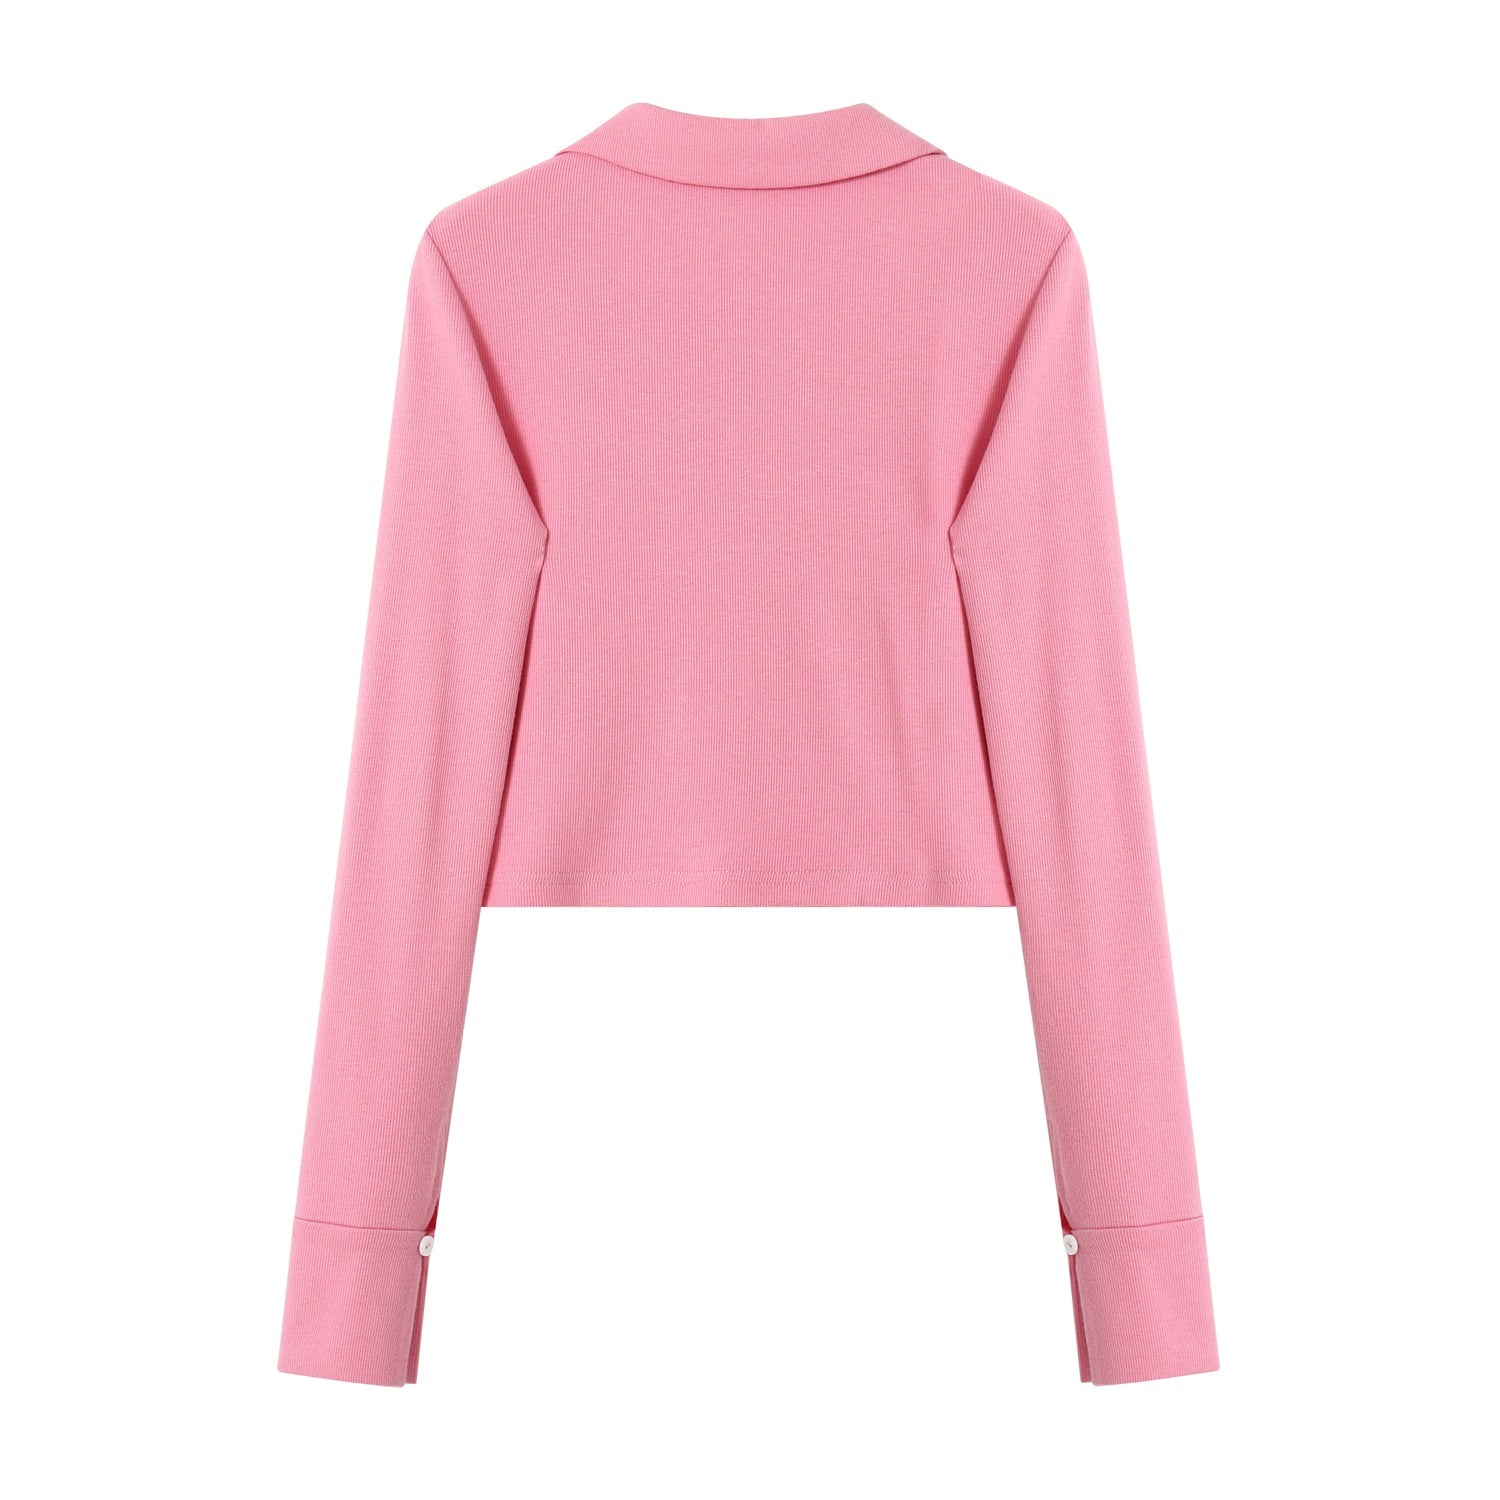 SOMESOWE Pink And White Ripped Shoulder Knitted Shirt | MADA IN CHINA